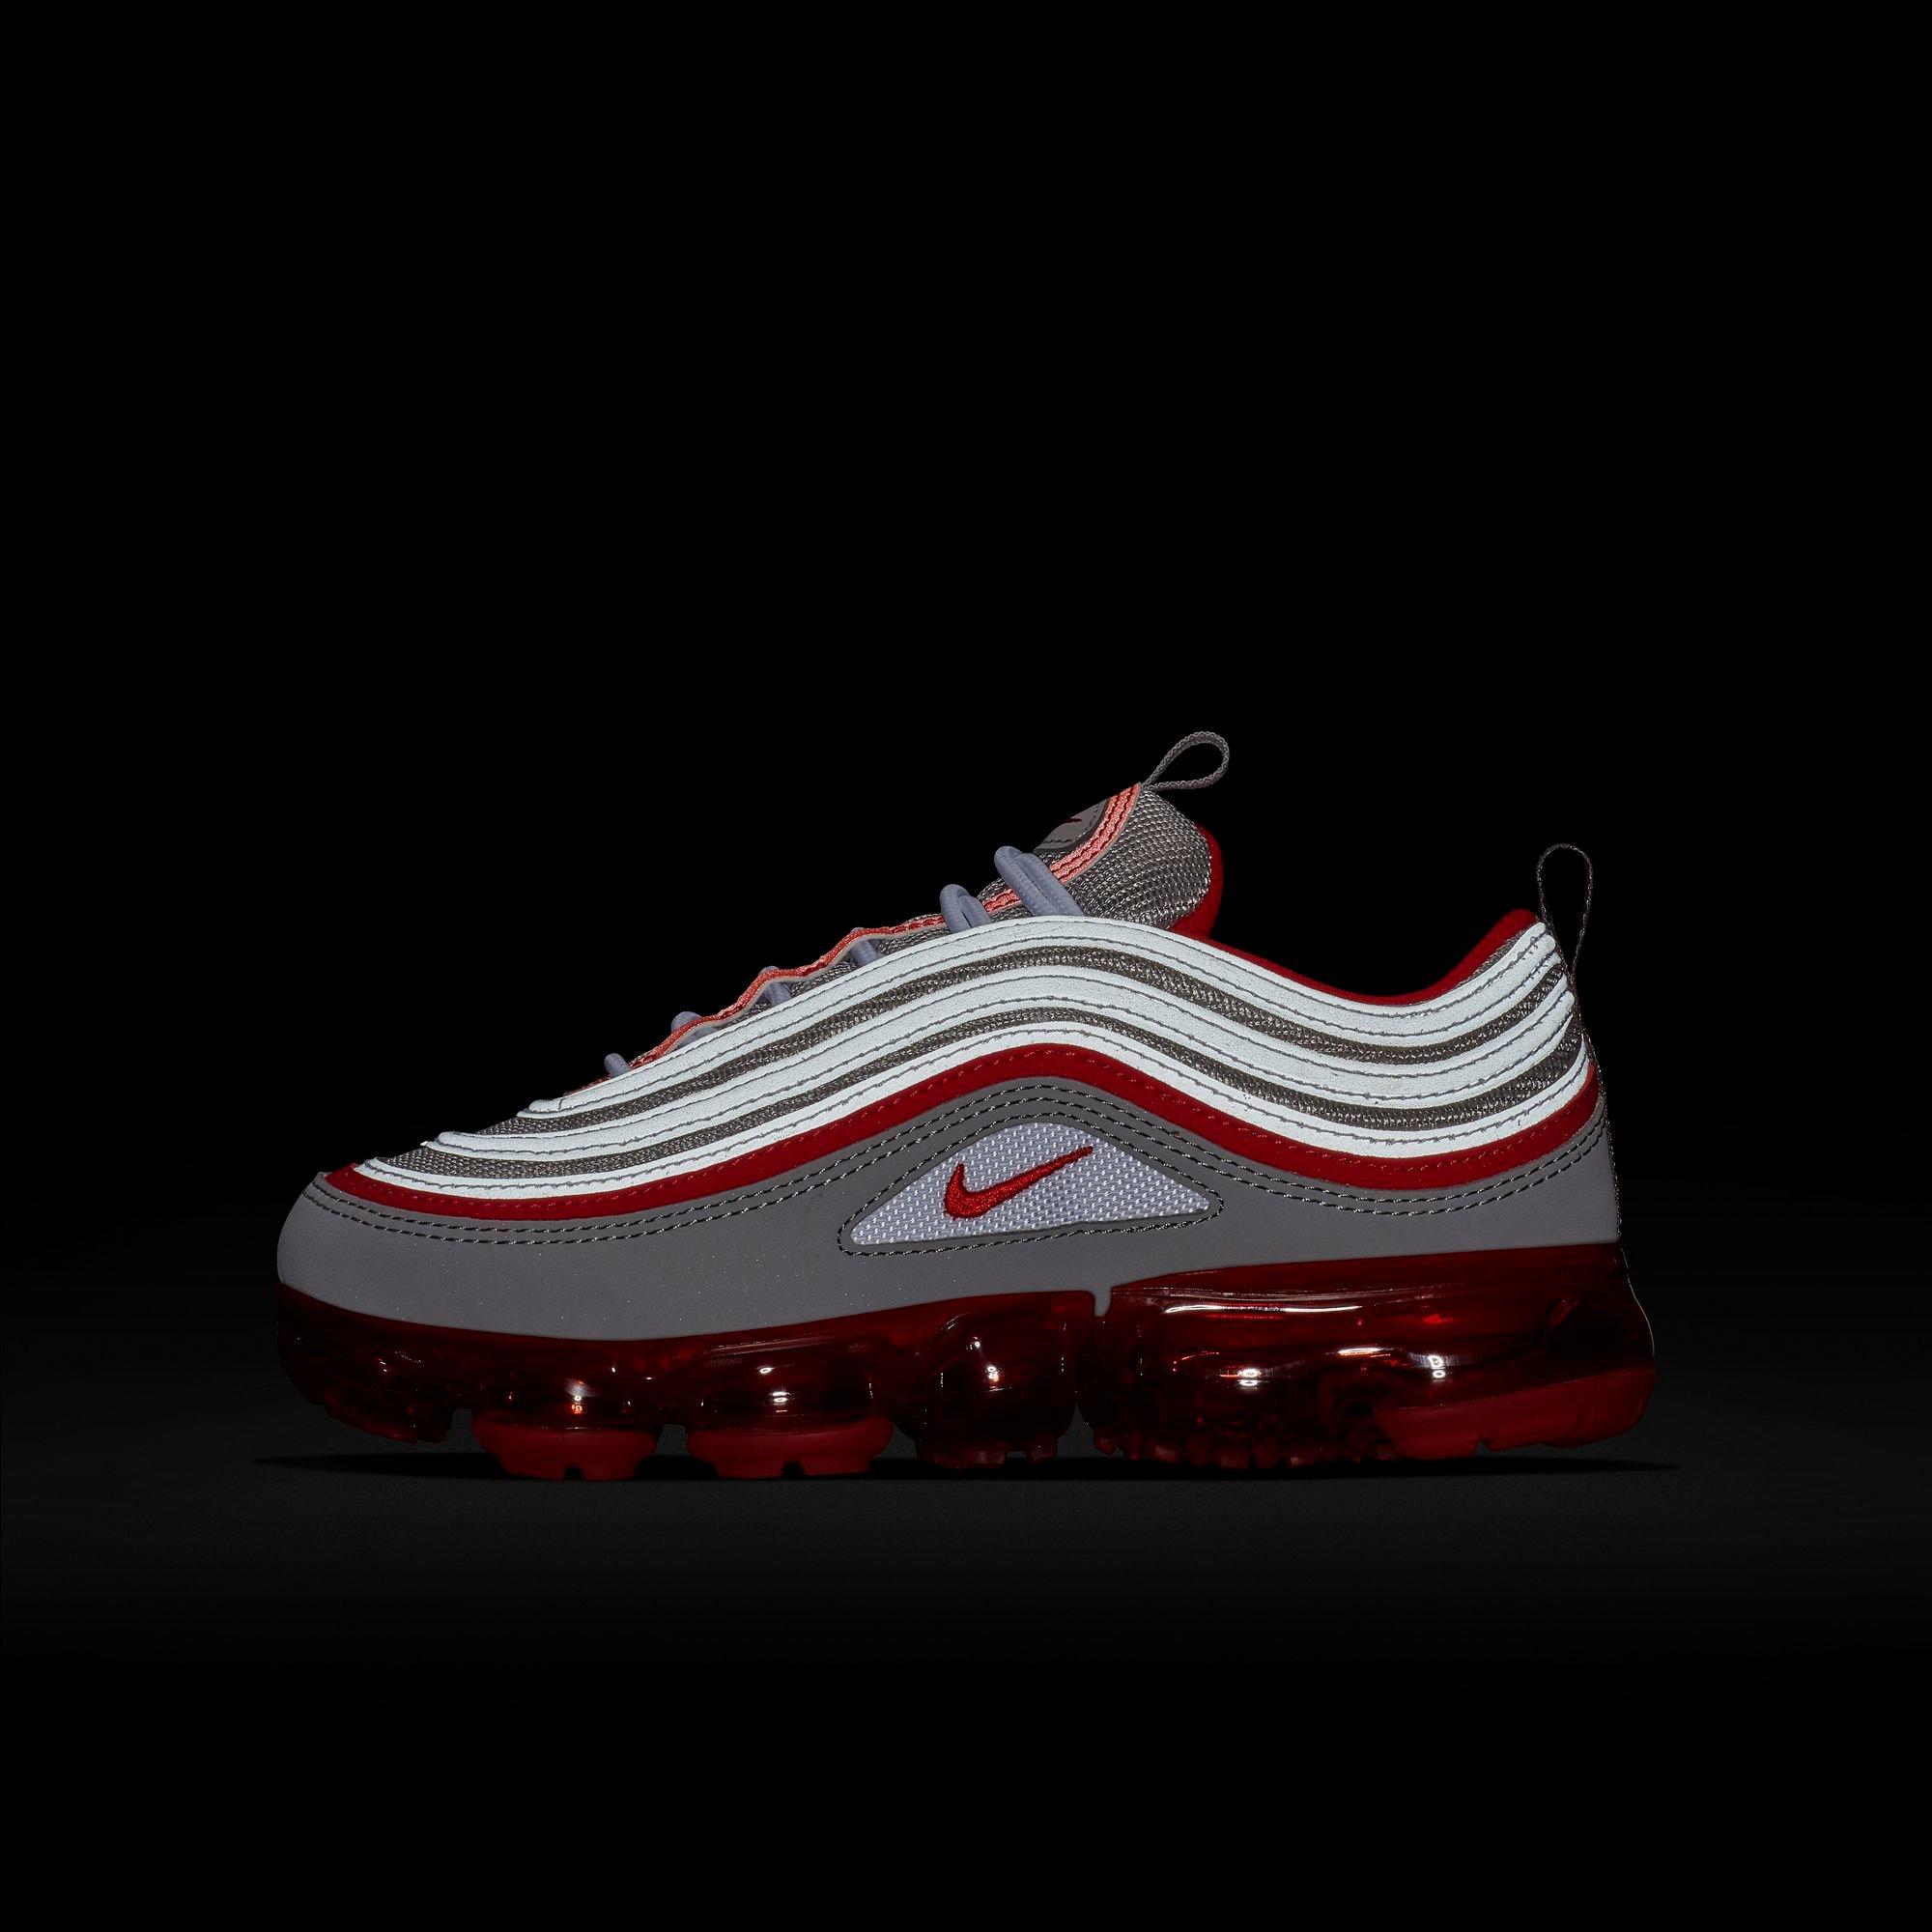 Nike Air Vapormax 97 For Only $ 5 Reseller Q u0026 A Live Show